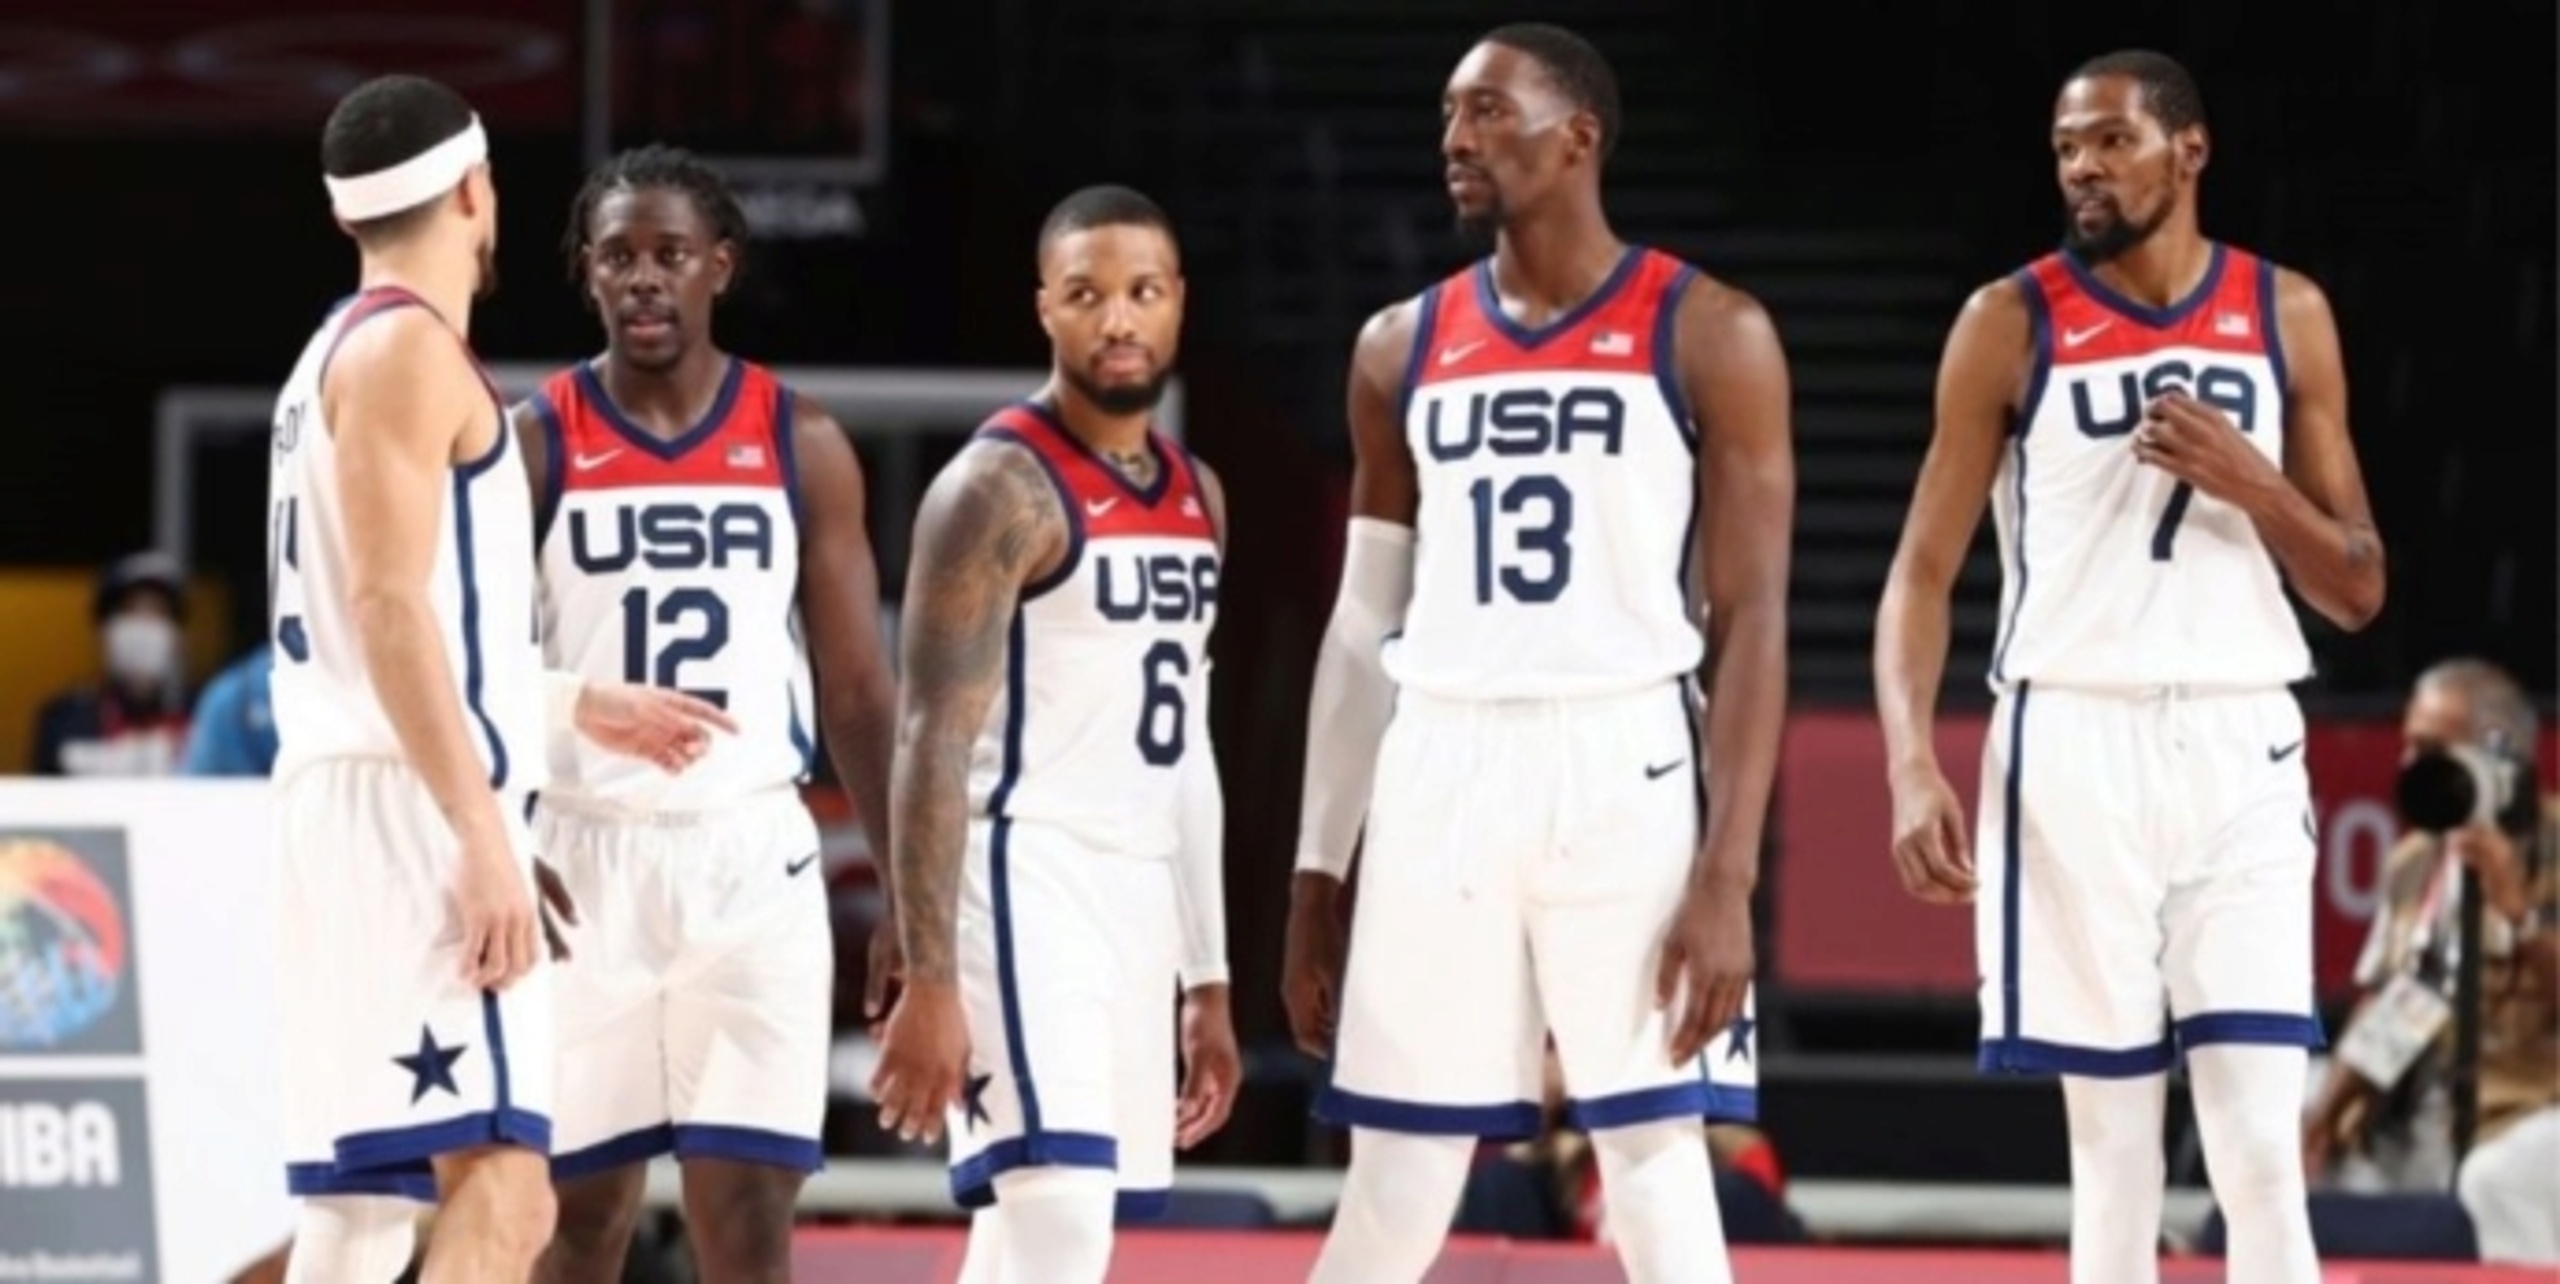 After a dominant win over Iran, what's next for Team USA?